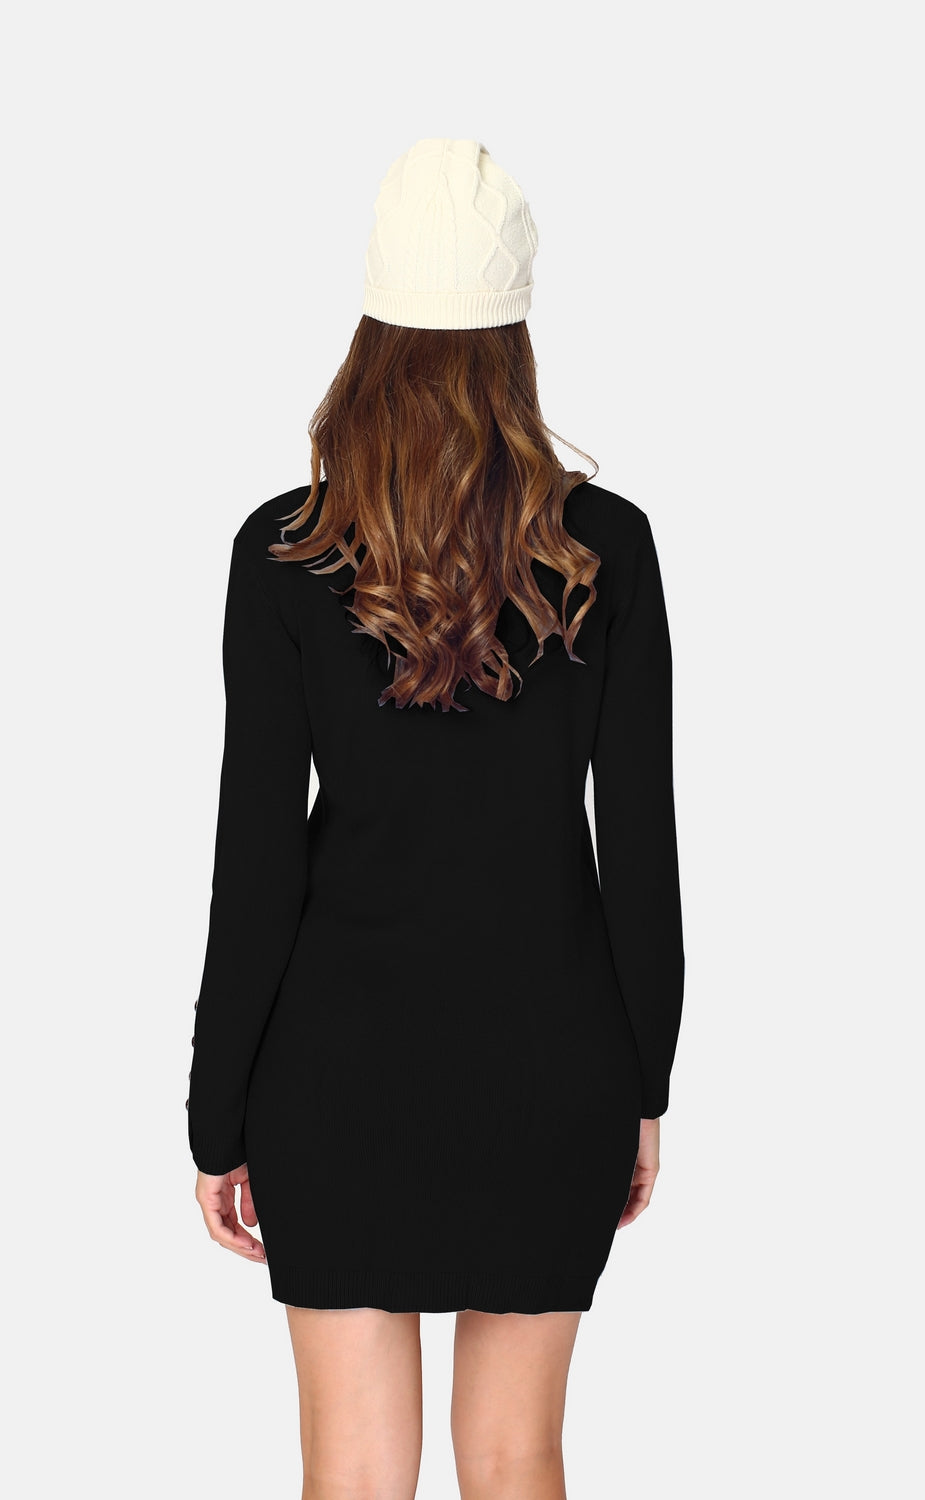 Round neck dress with button placket at the bottom of long sleeves